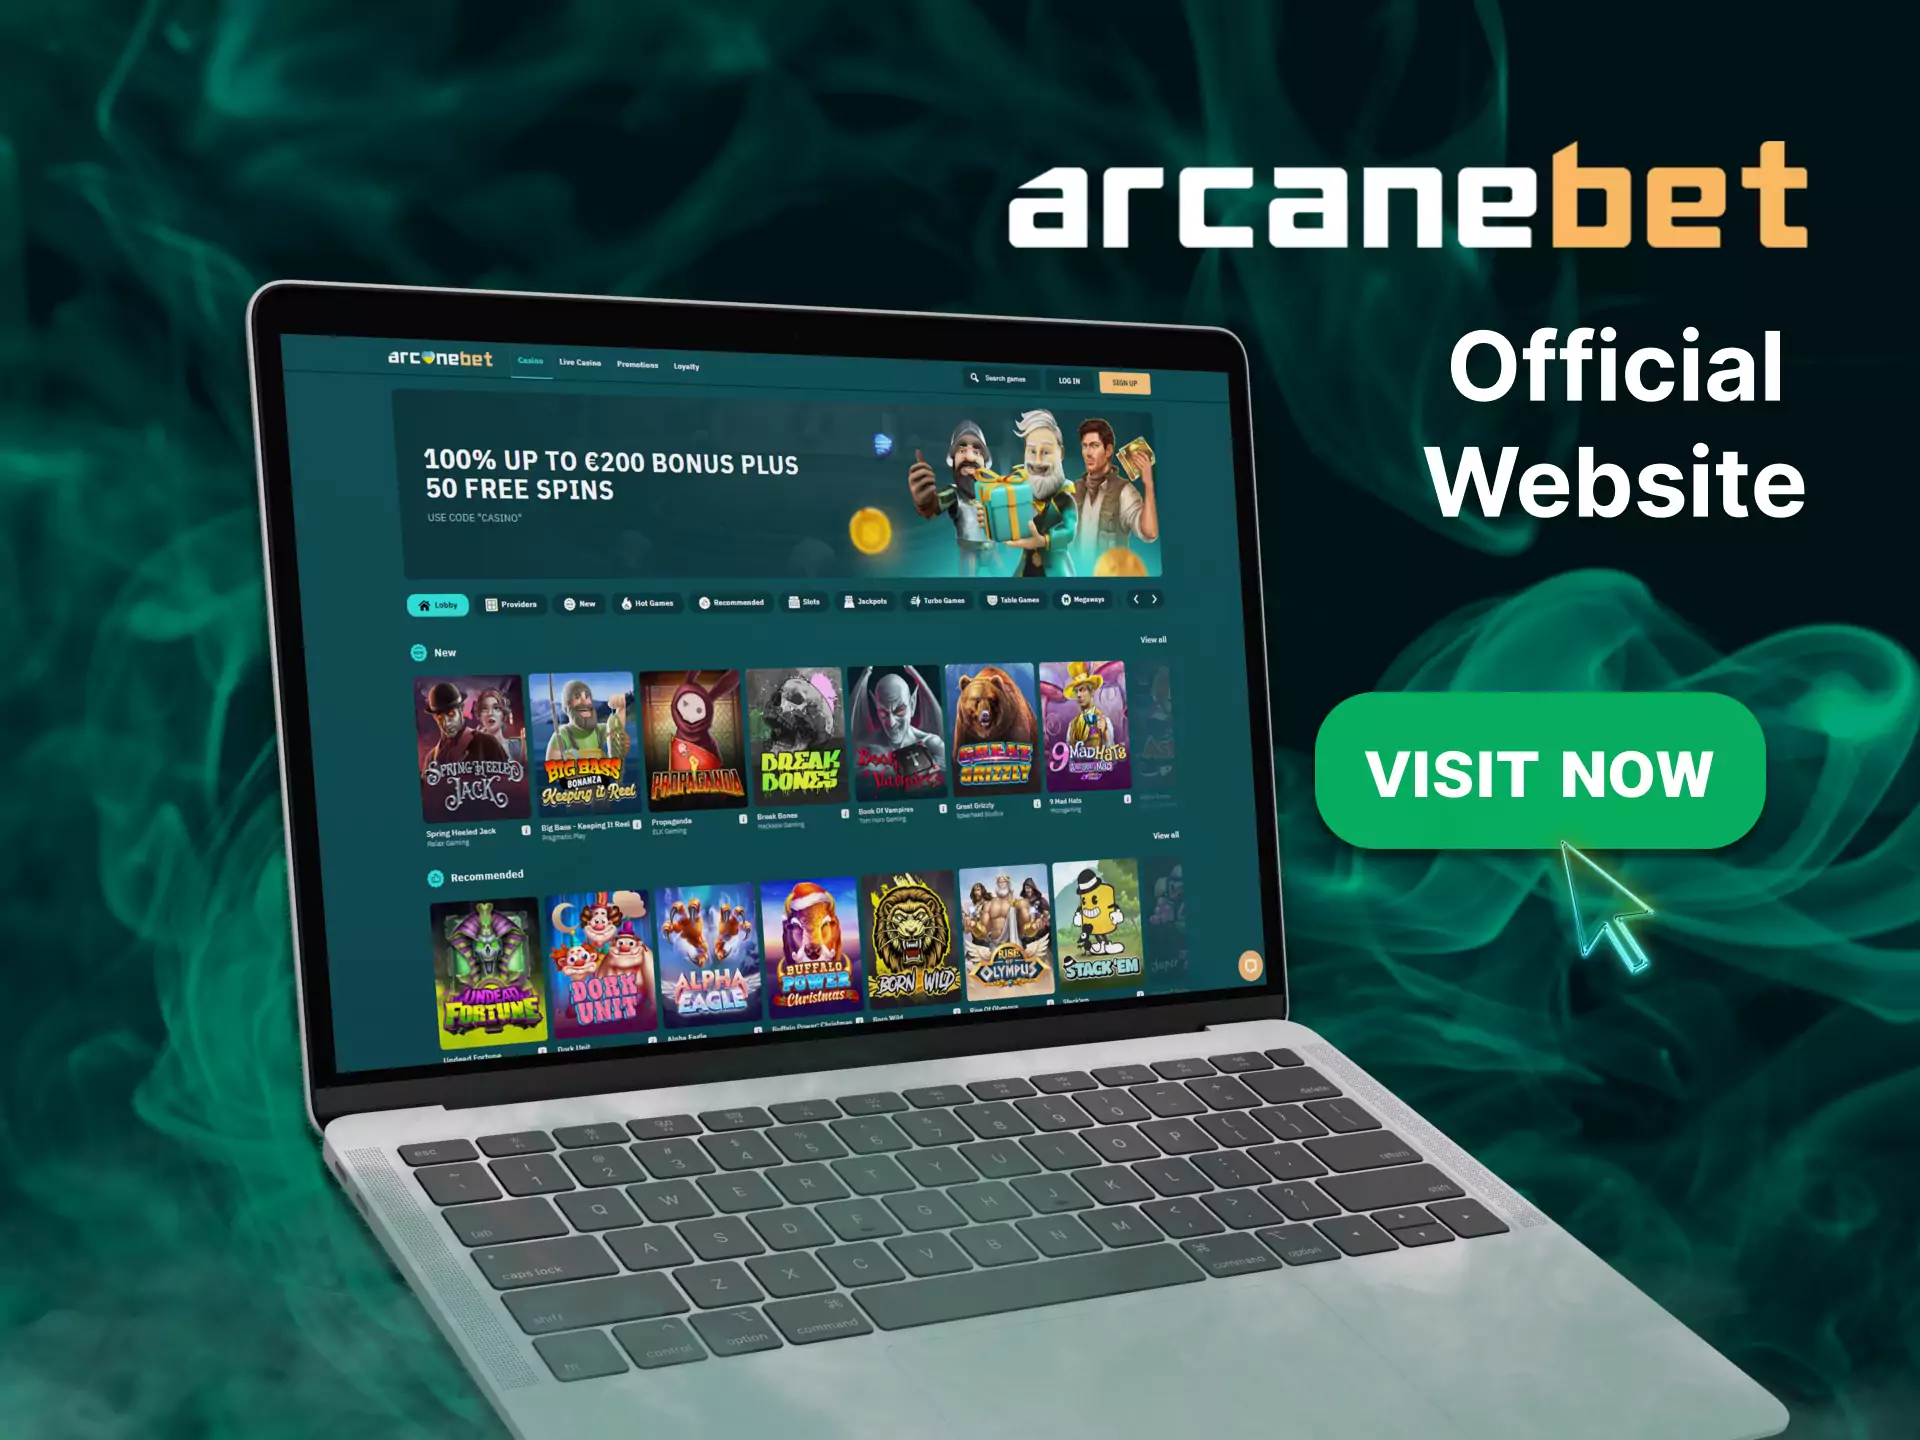 The official website of Arcanebet offers many convenient features and options.